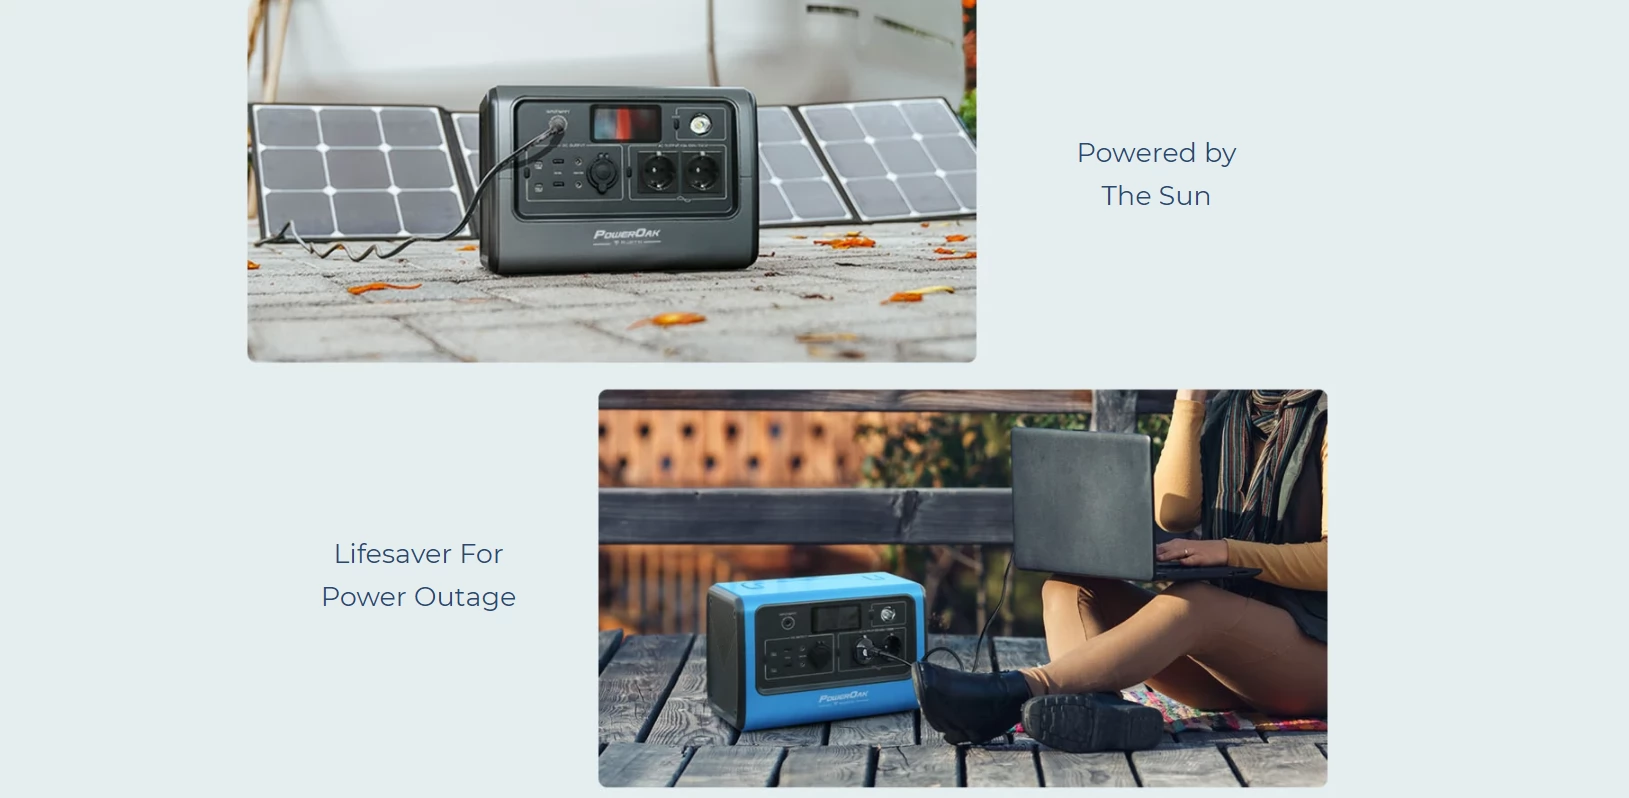 Stock Now! BLUETTI EB70 716WH/1000W SOLAR PORTABLE POWER STATION 220V Up to  200W (MPPT), Dual 100W USB-C Pure Sine Wave Inverter